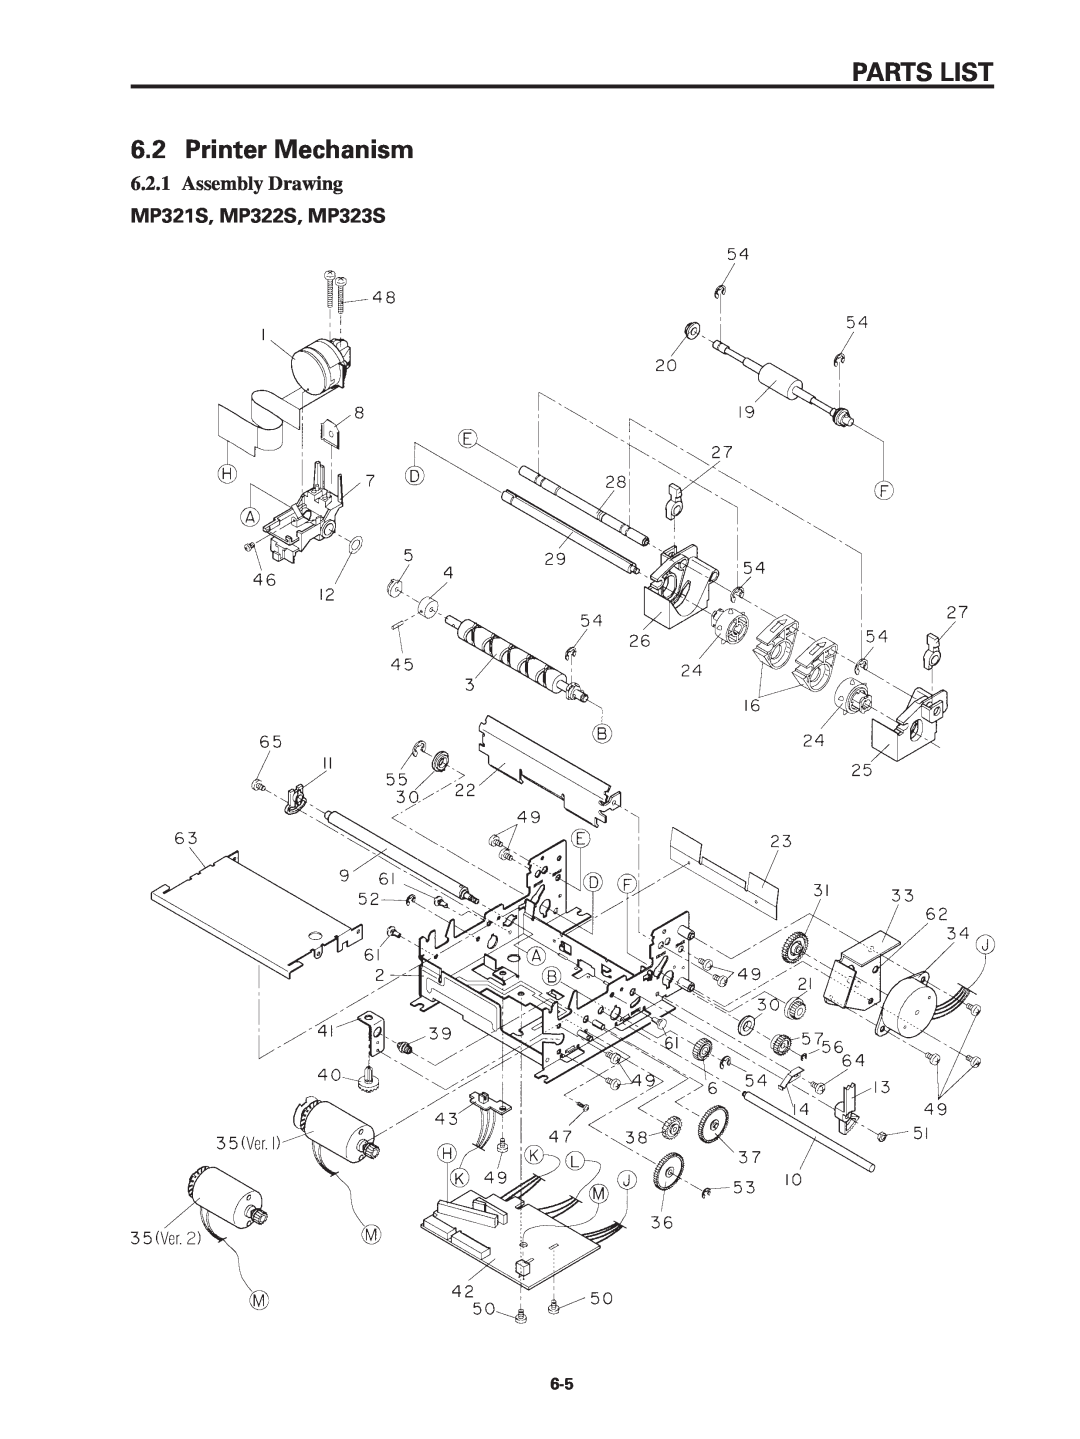 Star Micronics SP320S technical manual PARTS LIST 6.2 Printer Mechanism, Assembly Drawing, MP321S, MP322S, MP323S 